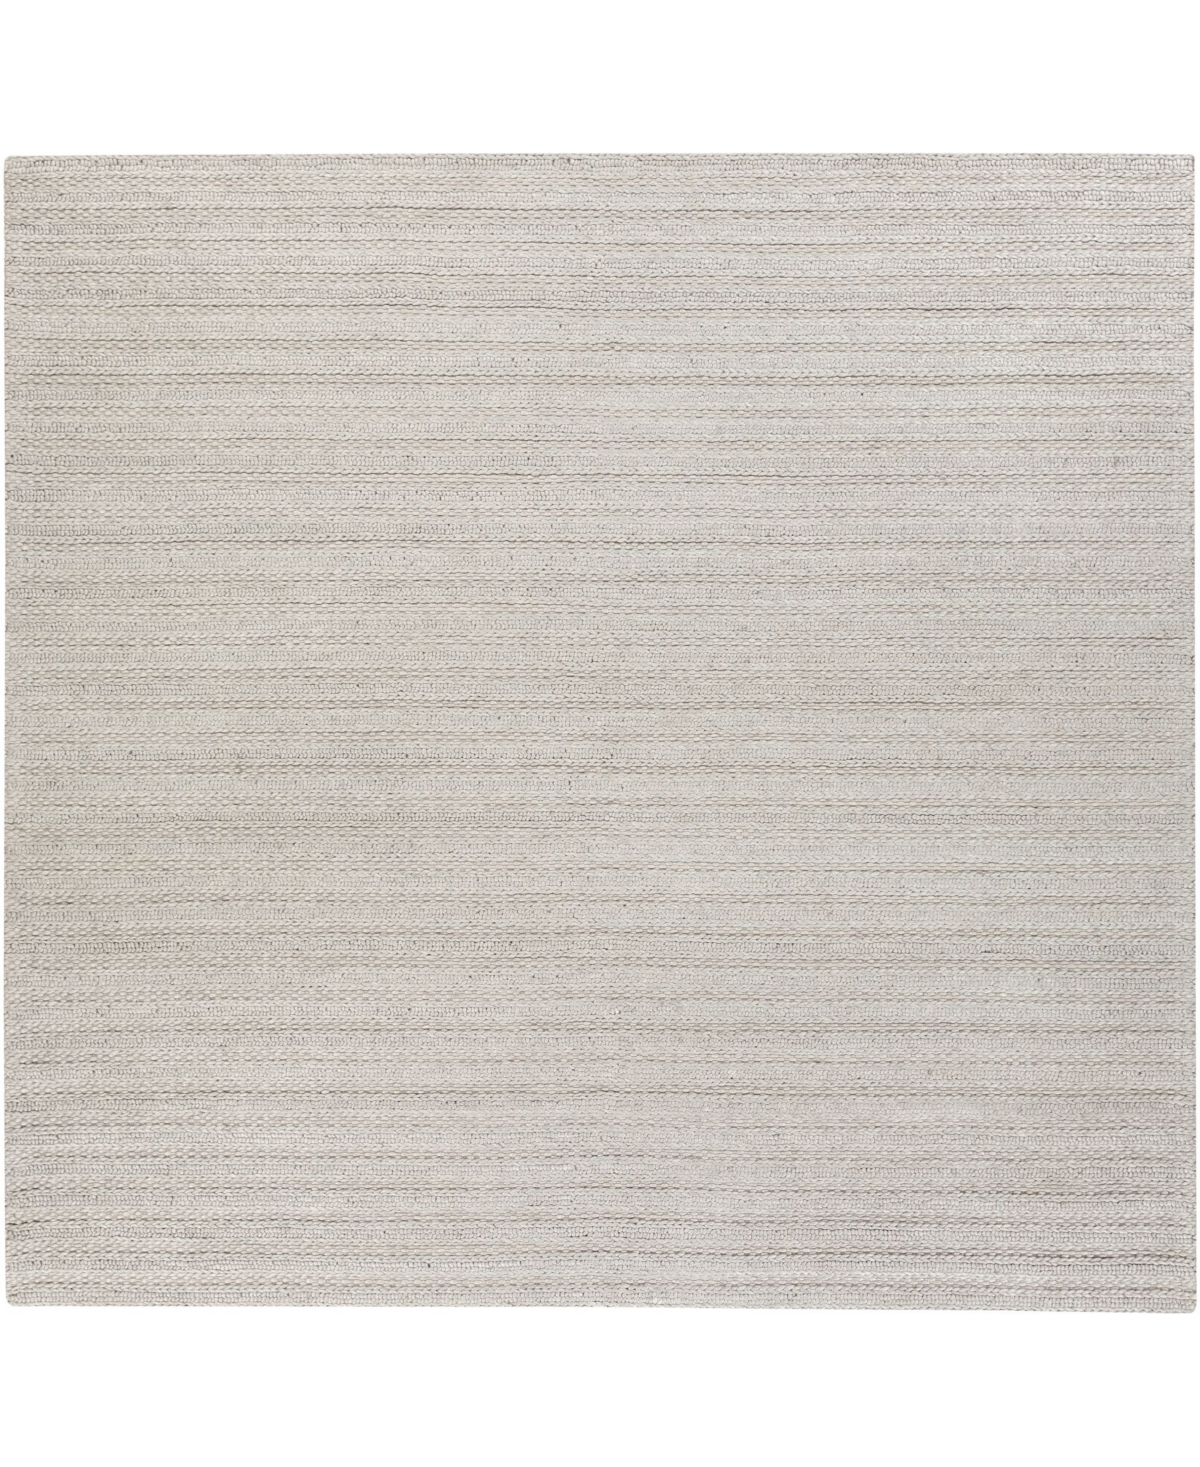 Surya Kindred Kdd-3001 Silver 8' x 8' Square Area Rug - Silver